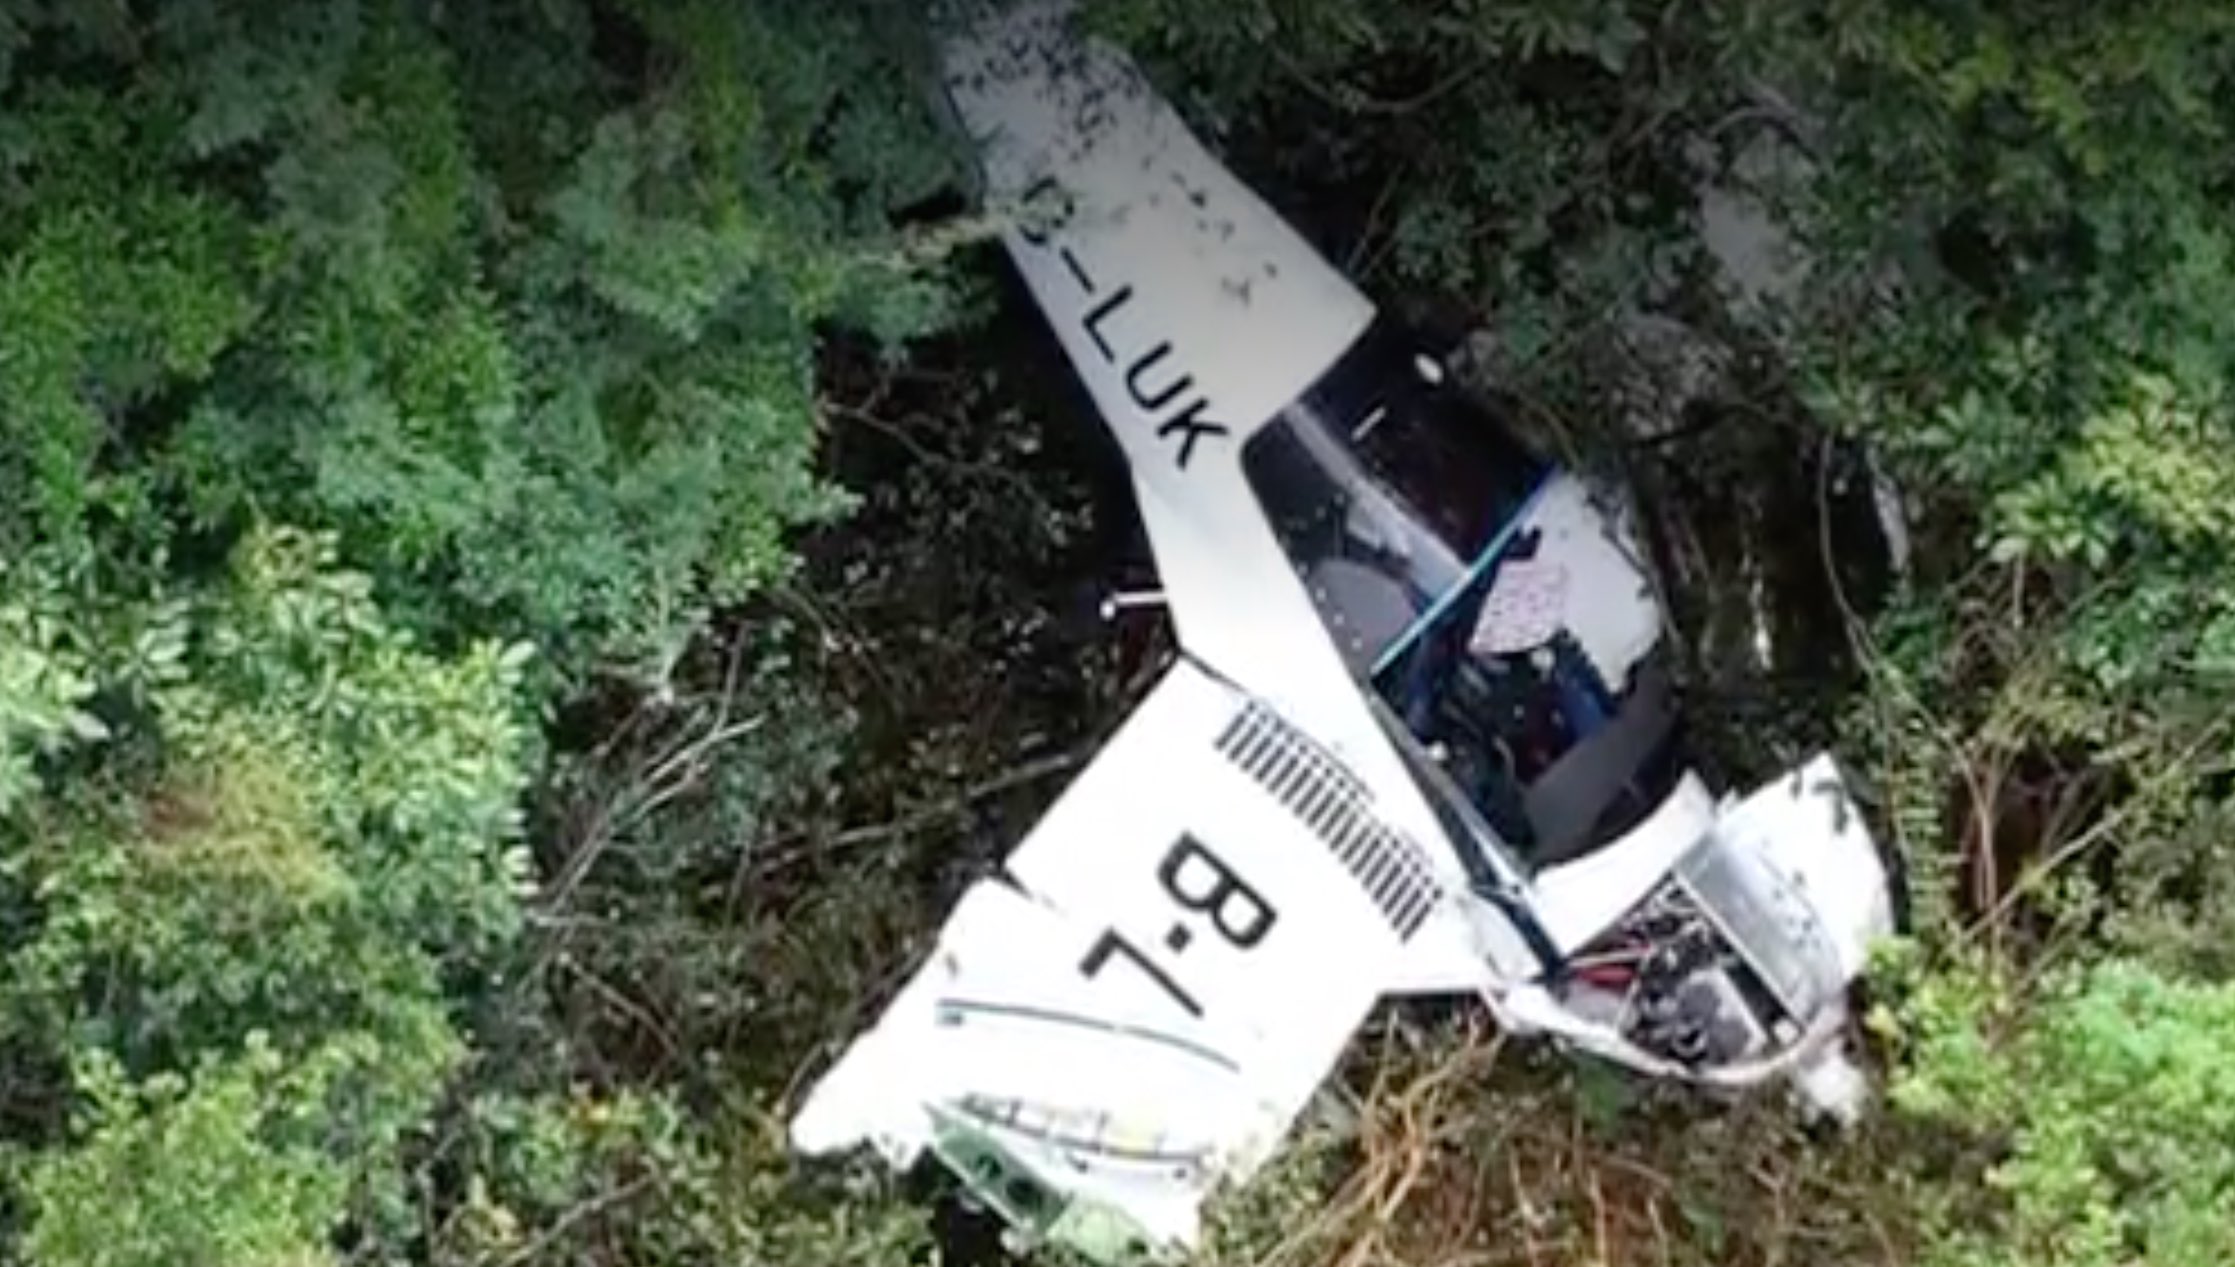 Picture of the crashed  Zlin Z42. Via screenshot from Apple Daily